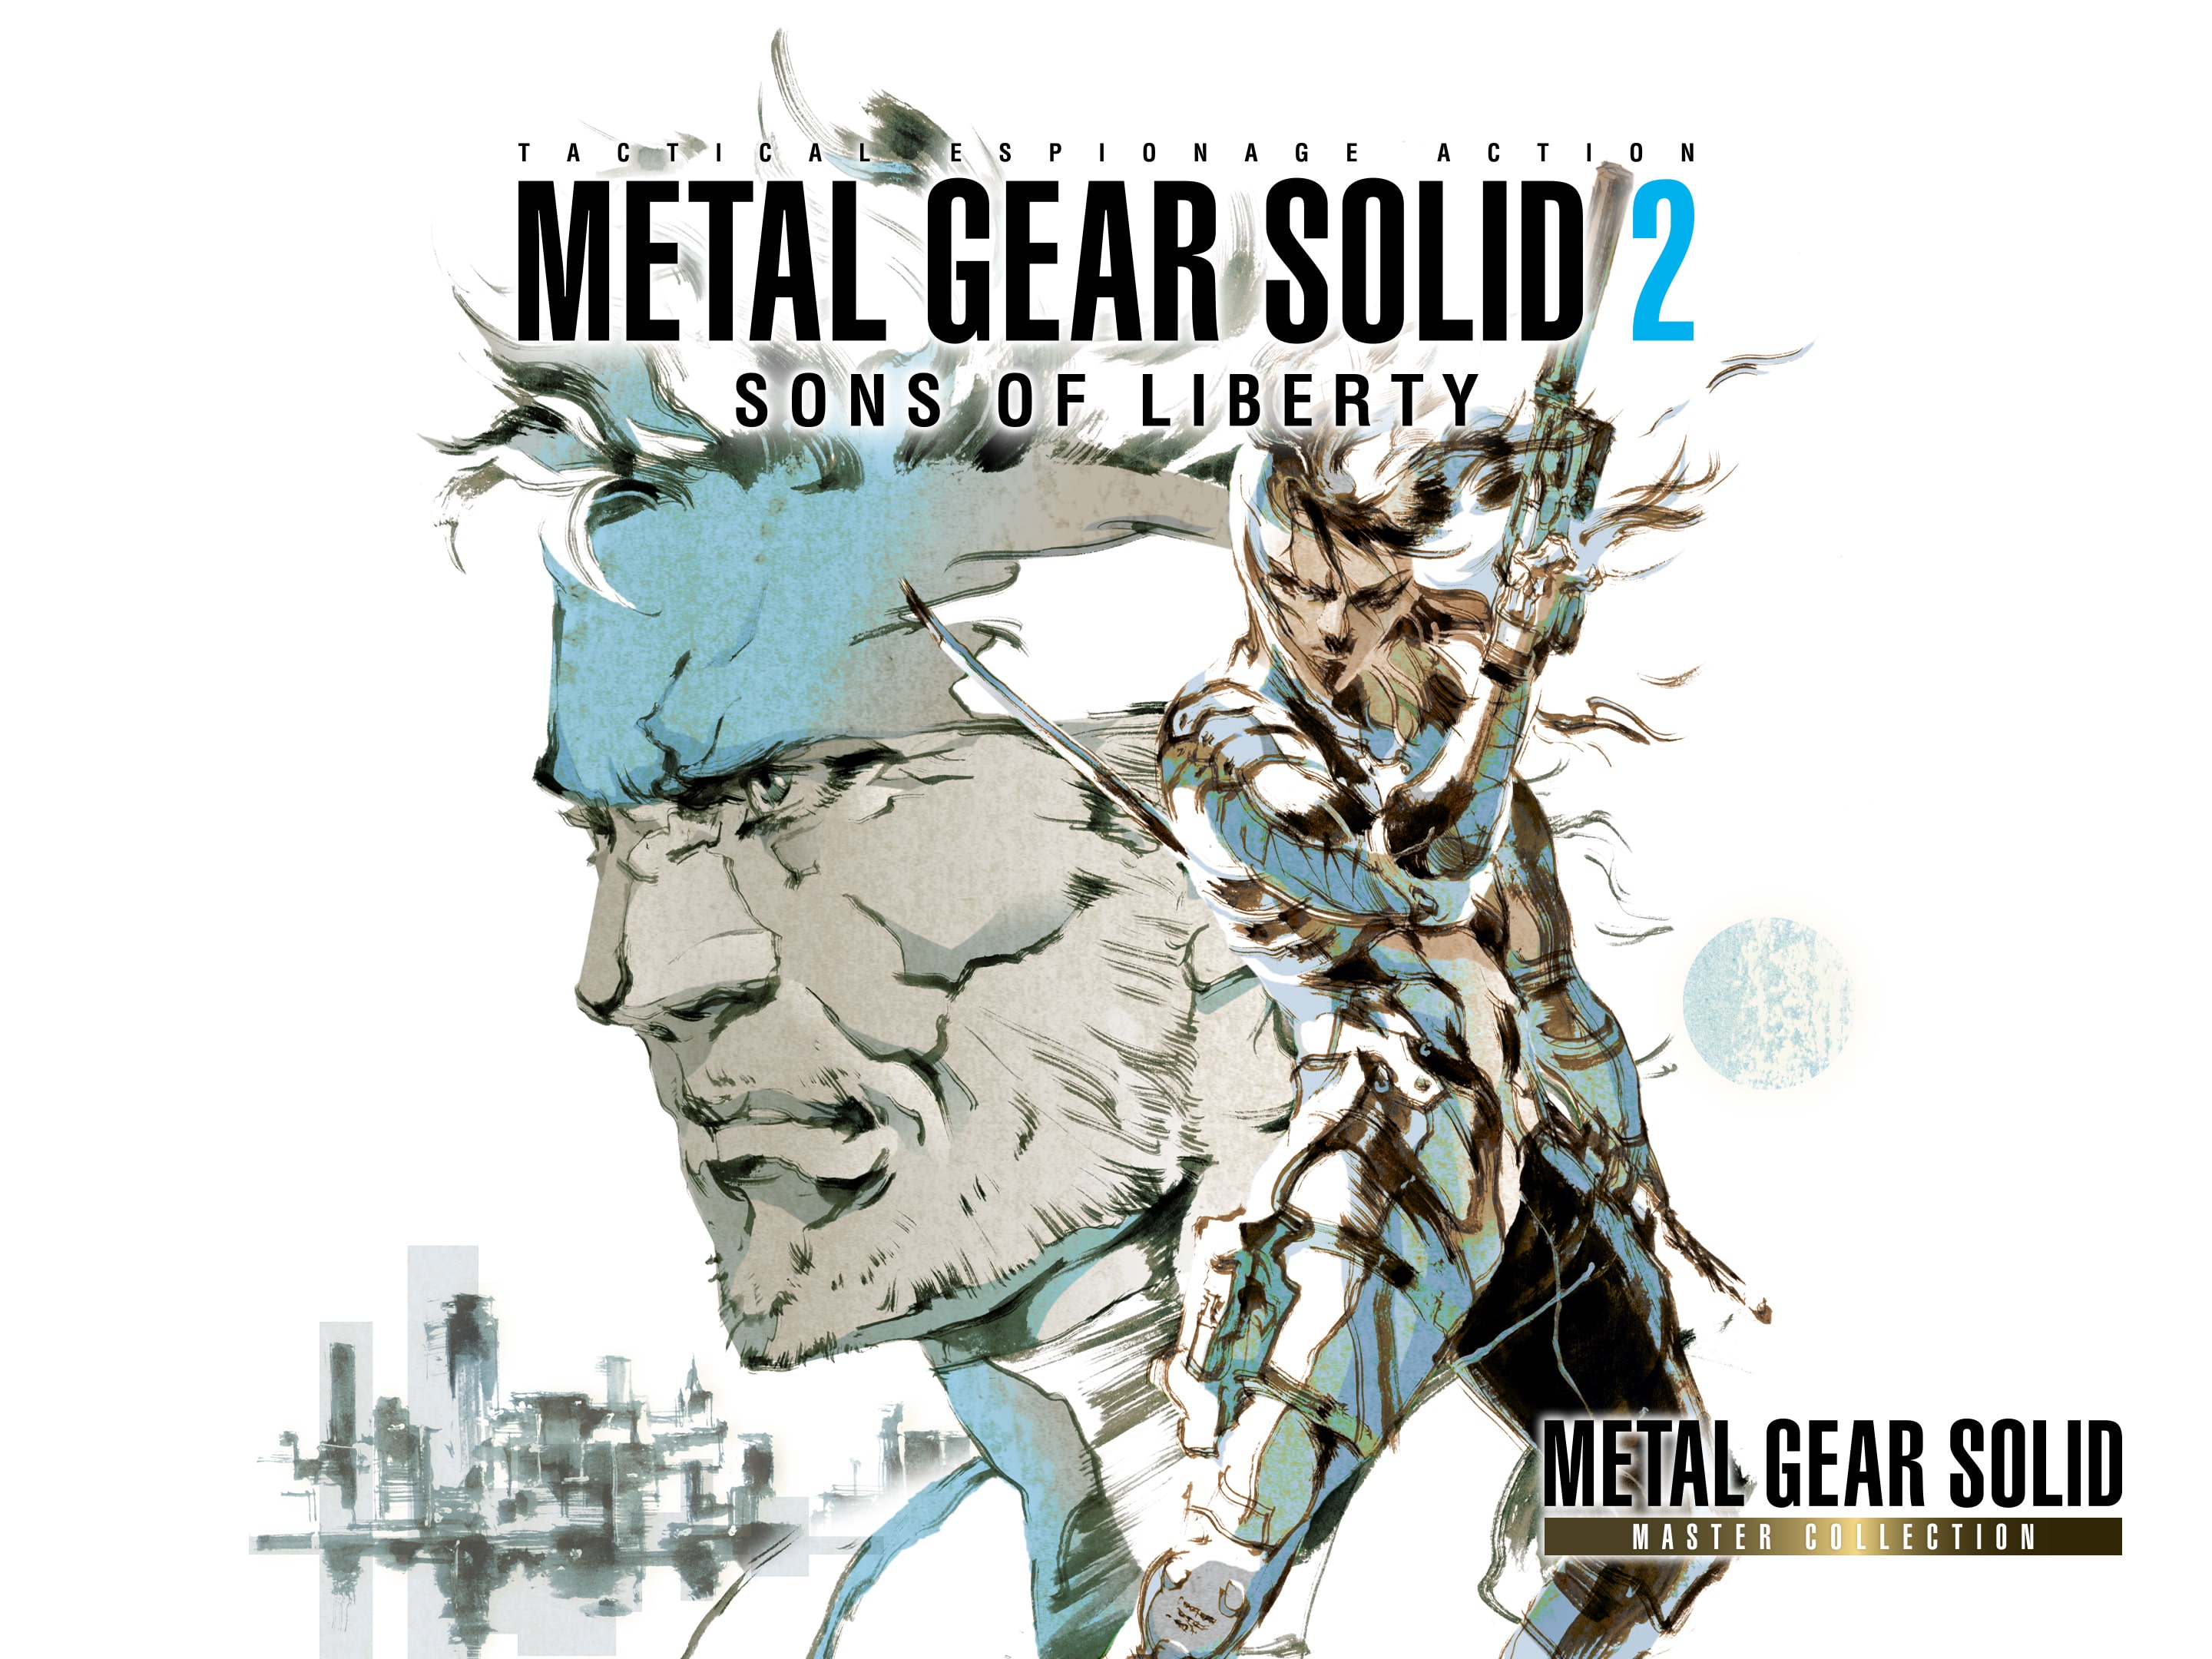 Metal Gear Solid: Master Collection Vol. 1 (Multi-Language) for PlayStation  5 - Bitcoin & Lightning accepted